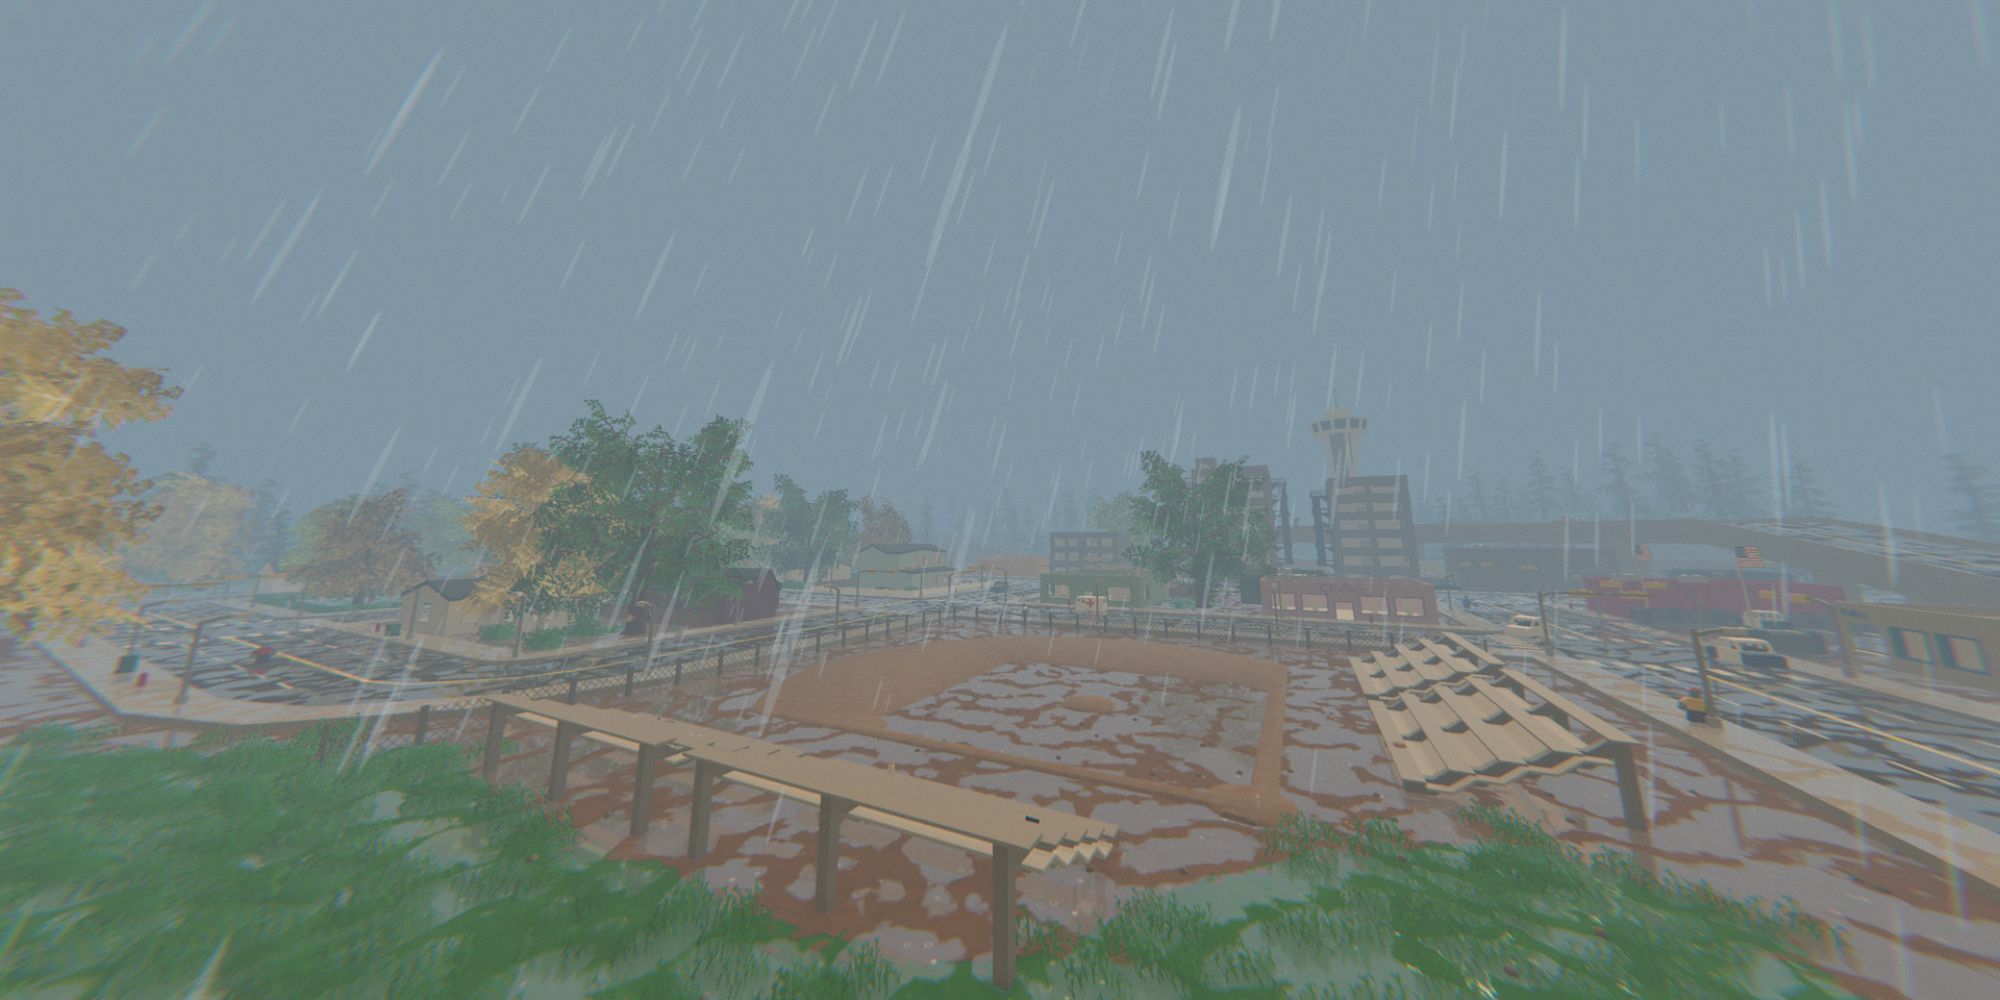 An image of an abandonded sports field from the survival game Unturned